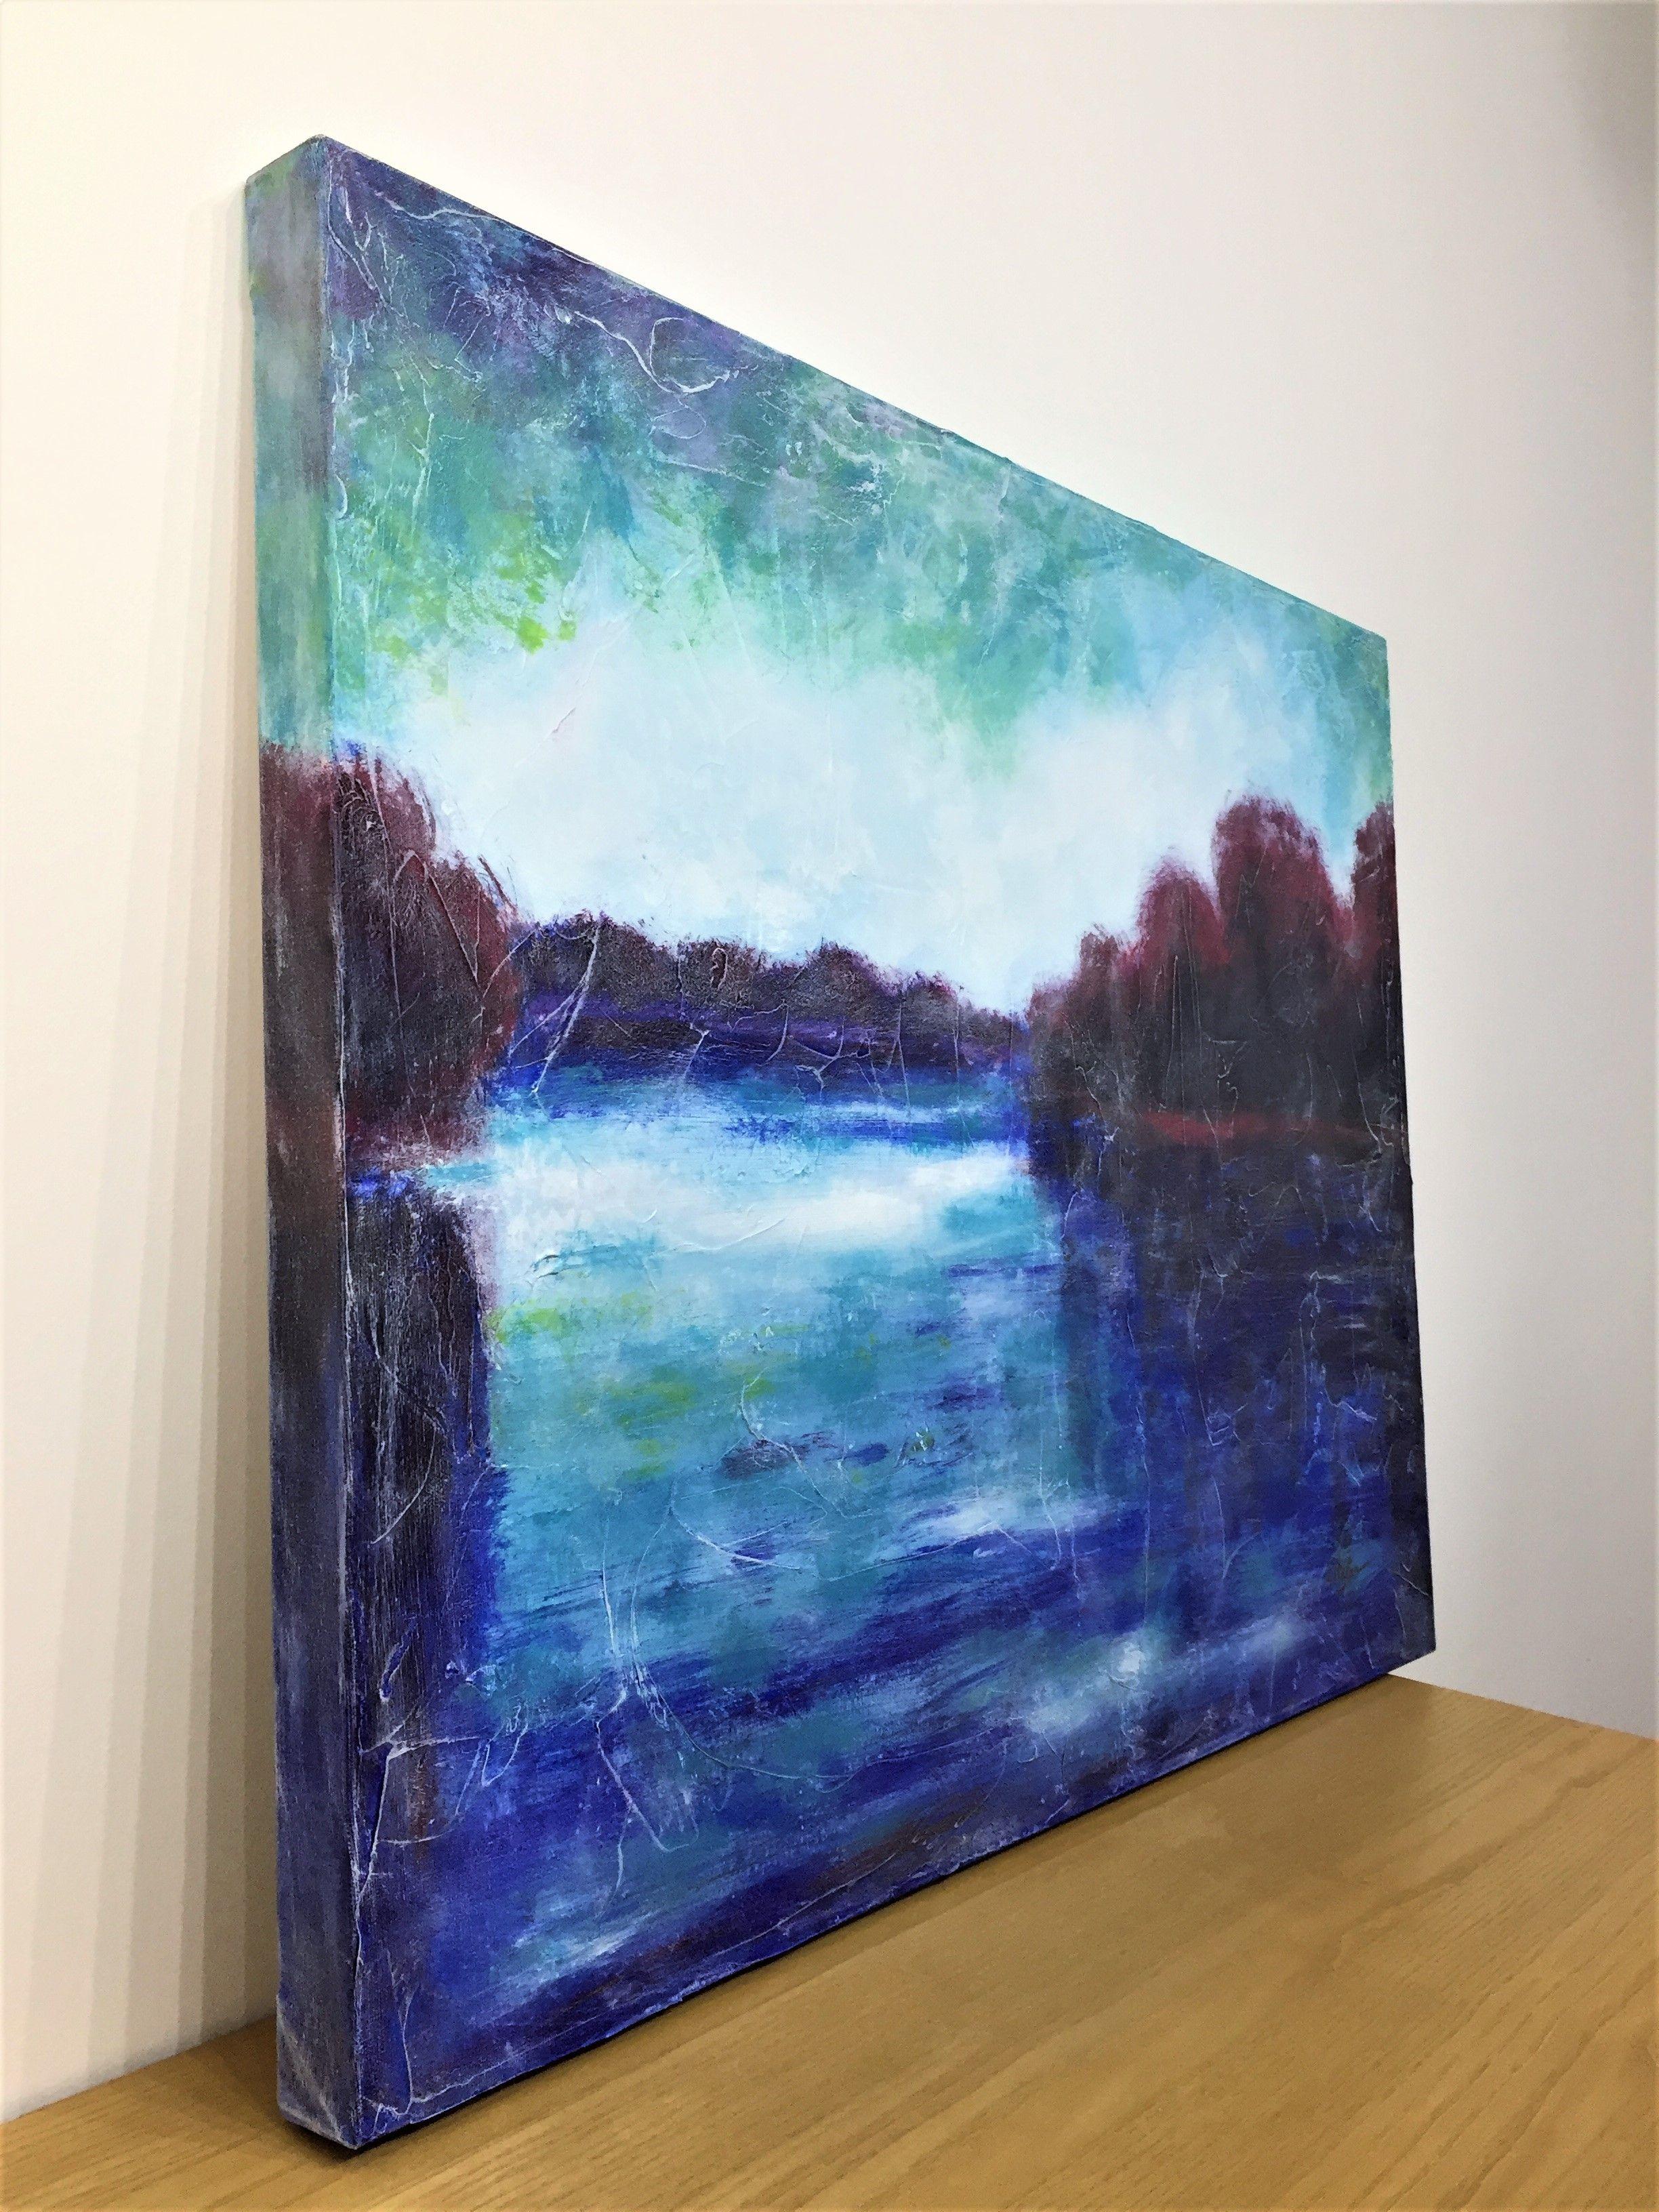 Reflection by the lake    Moments of the last days of October ...  Contemporary landscape with impressionistic influences, made with contrasting colors of purple, blue and turquoise. Rich texture. Clouds and trees reflecting in the water.   The